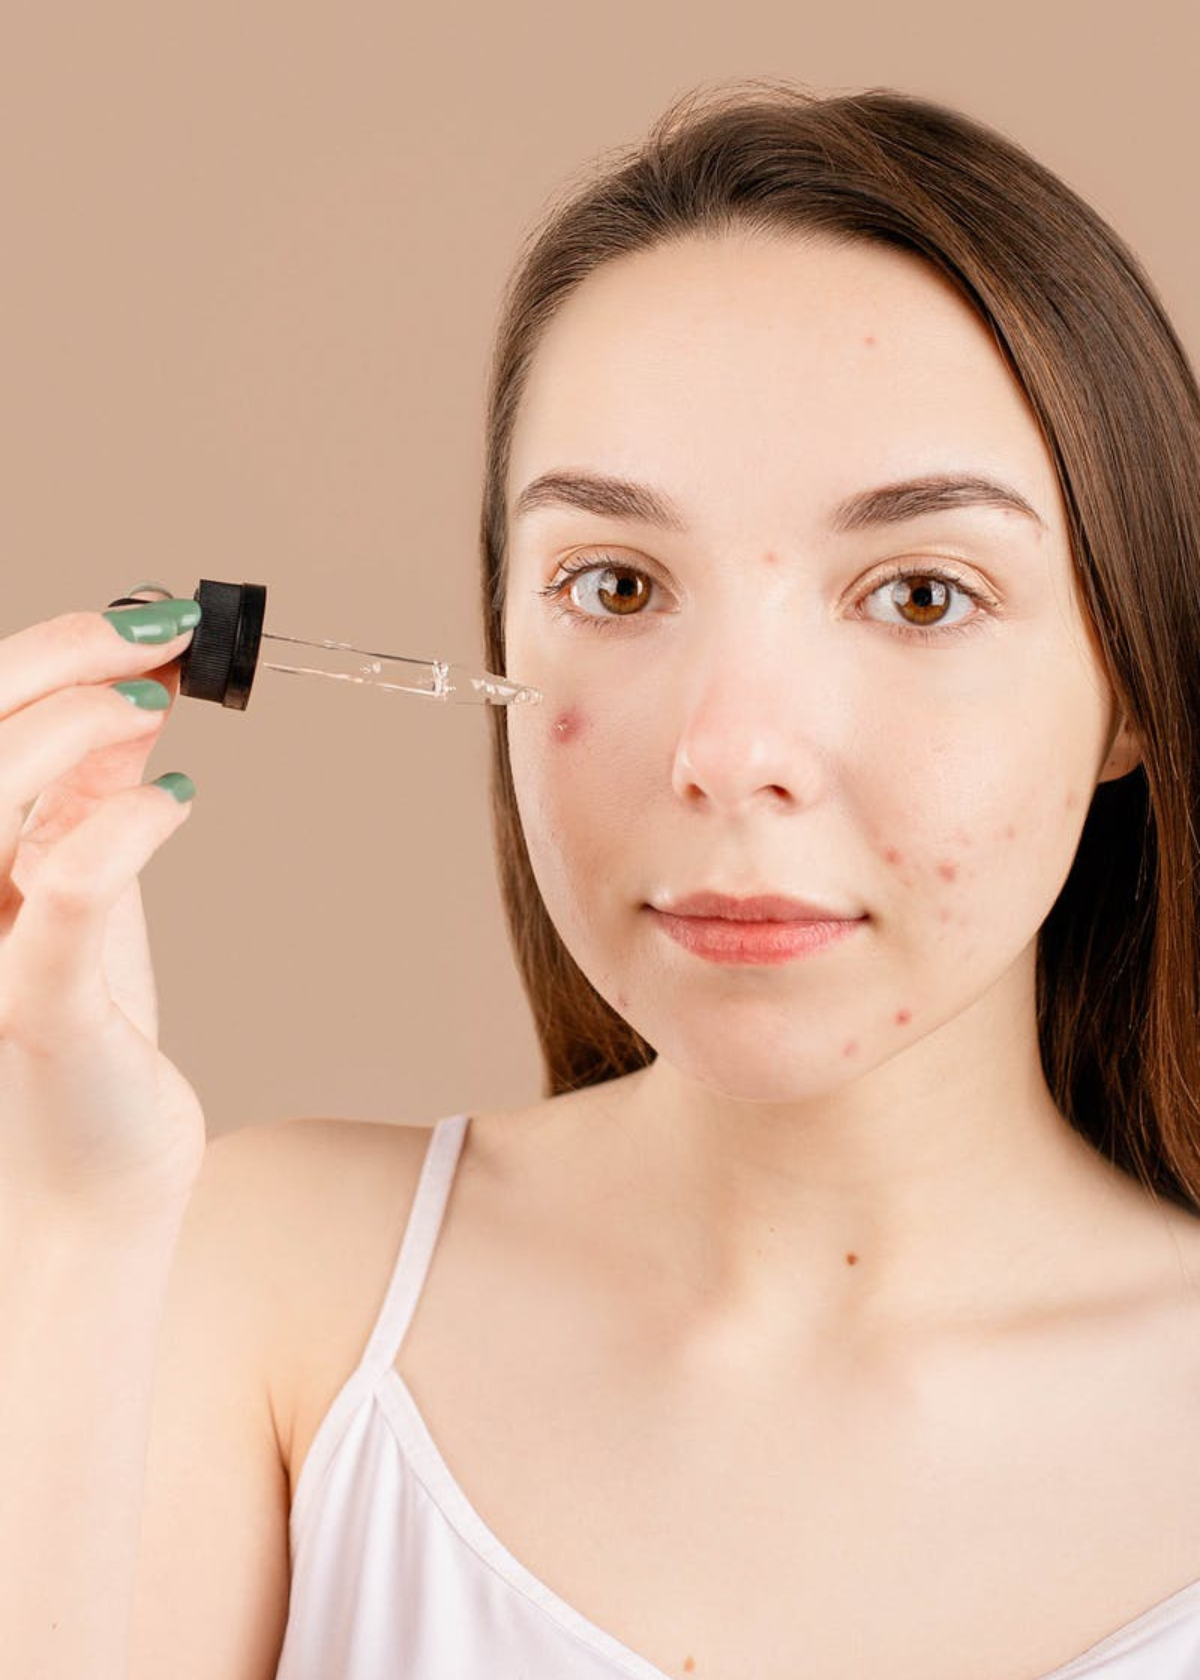 Best Serum For Acne Scars: 5 Brands that Work!